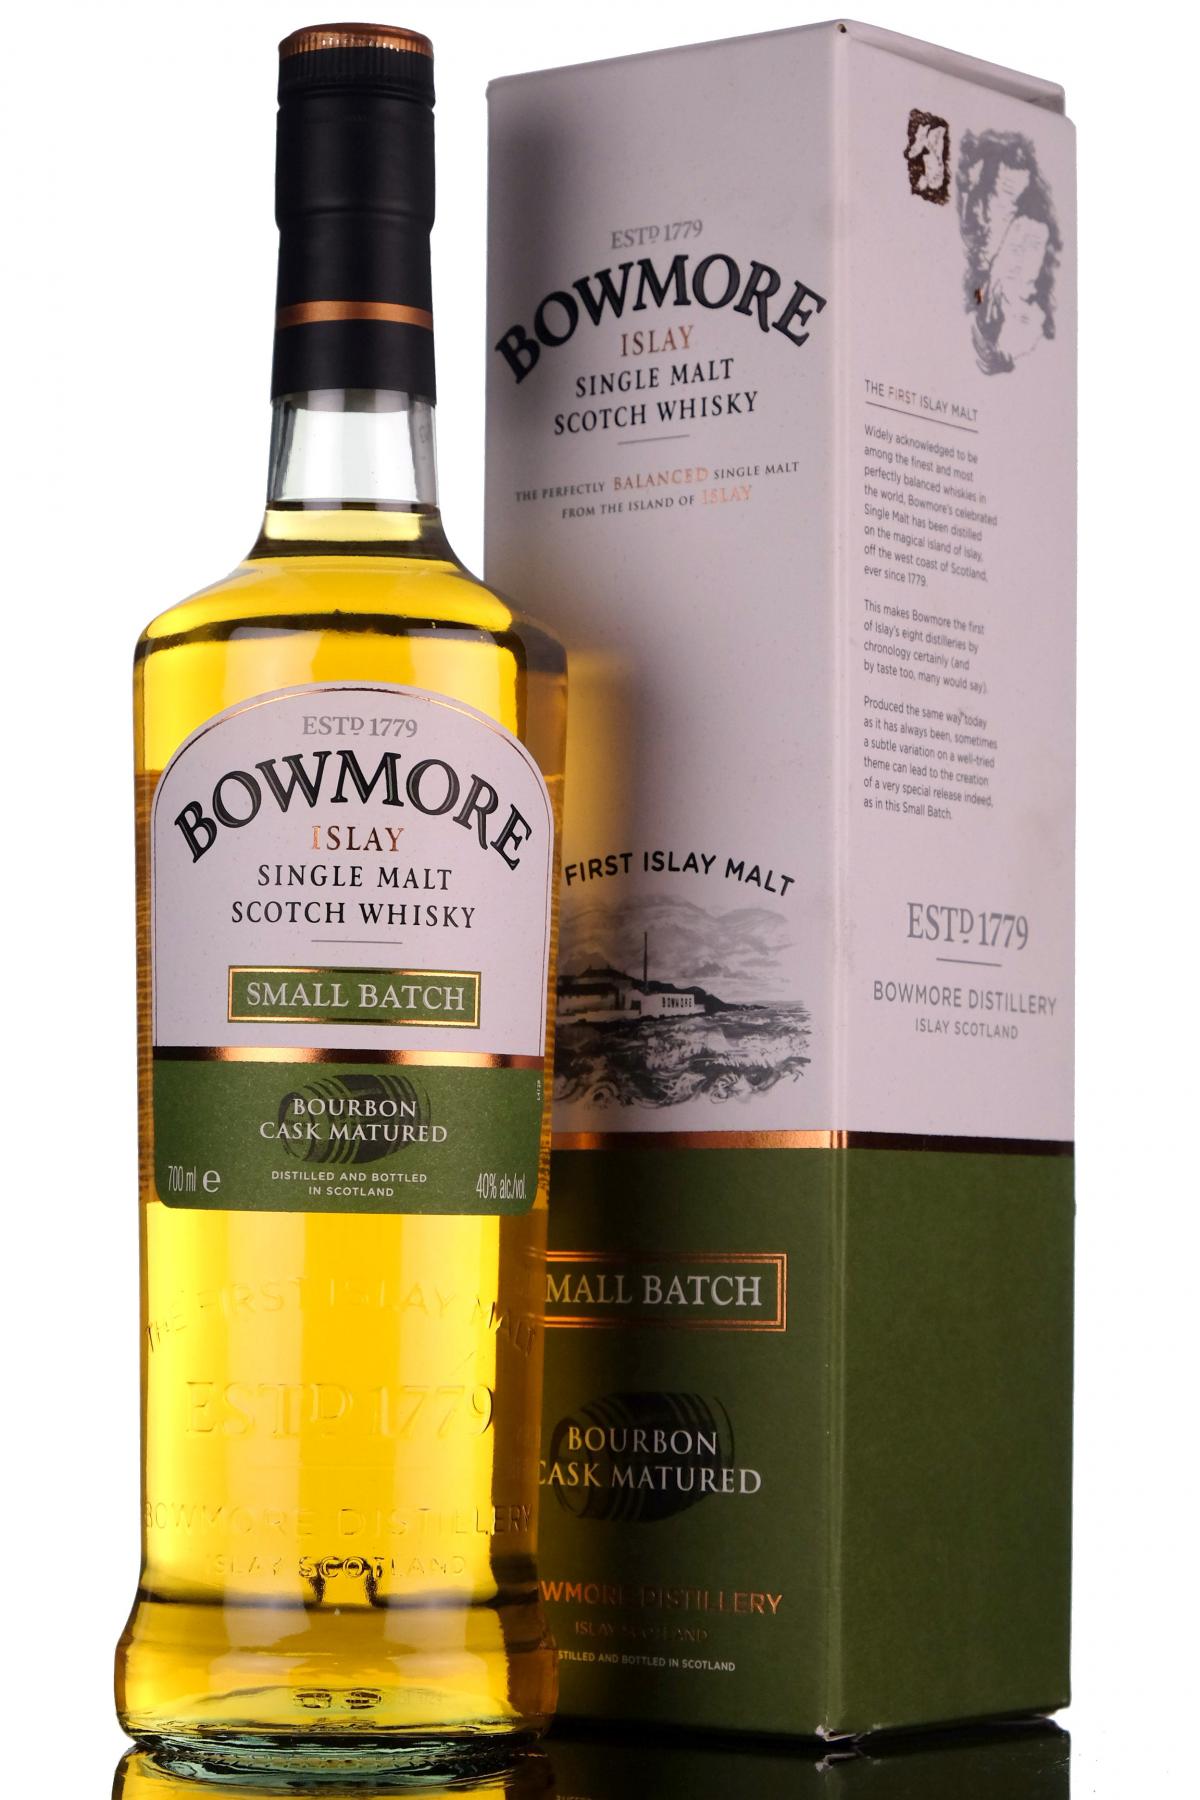 Bowmore Small Batch Reserve - 2010s